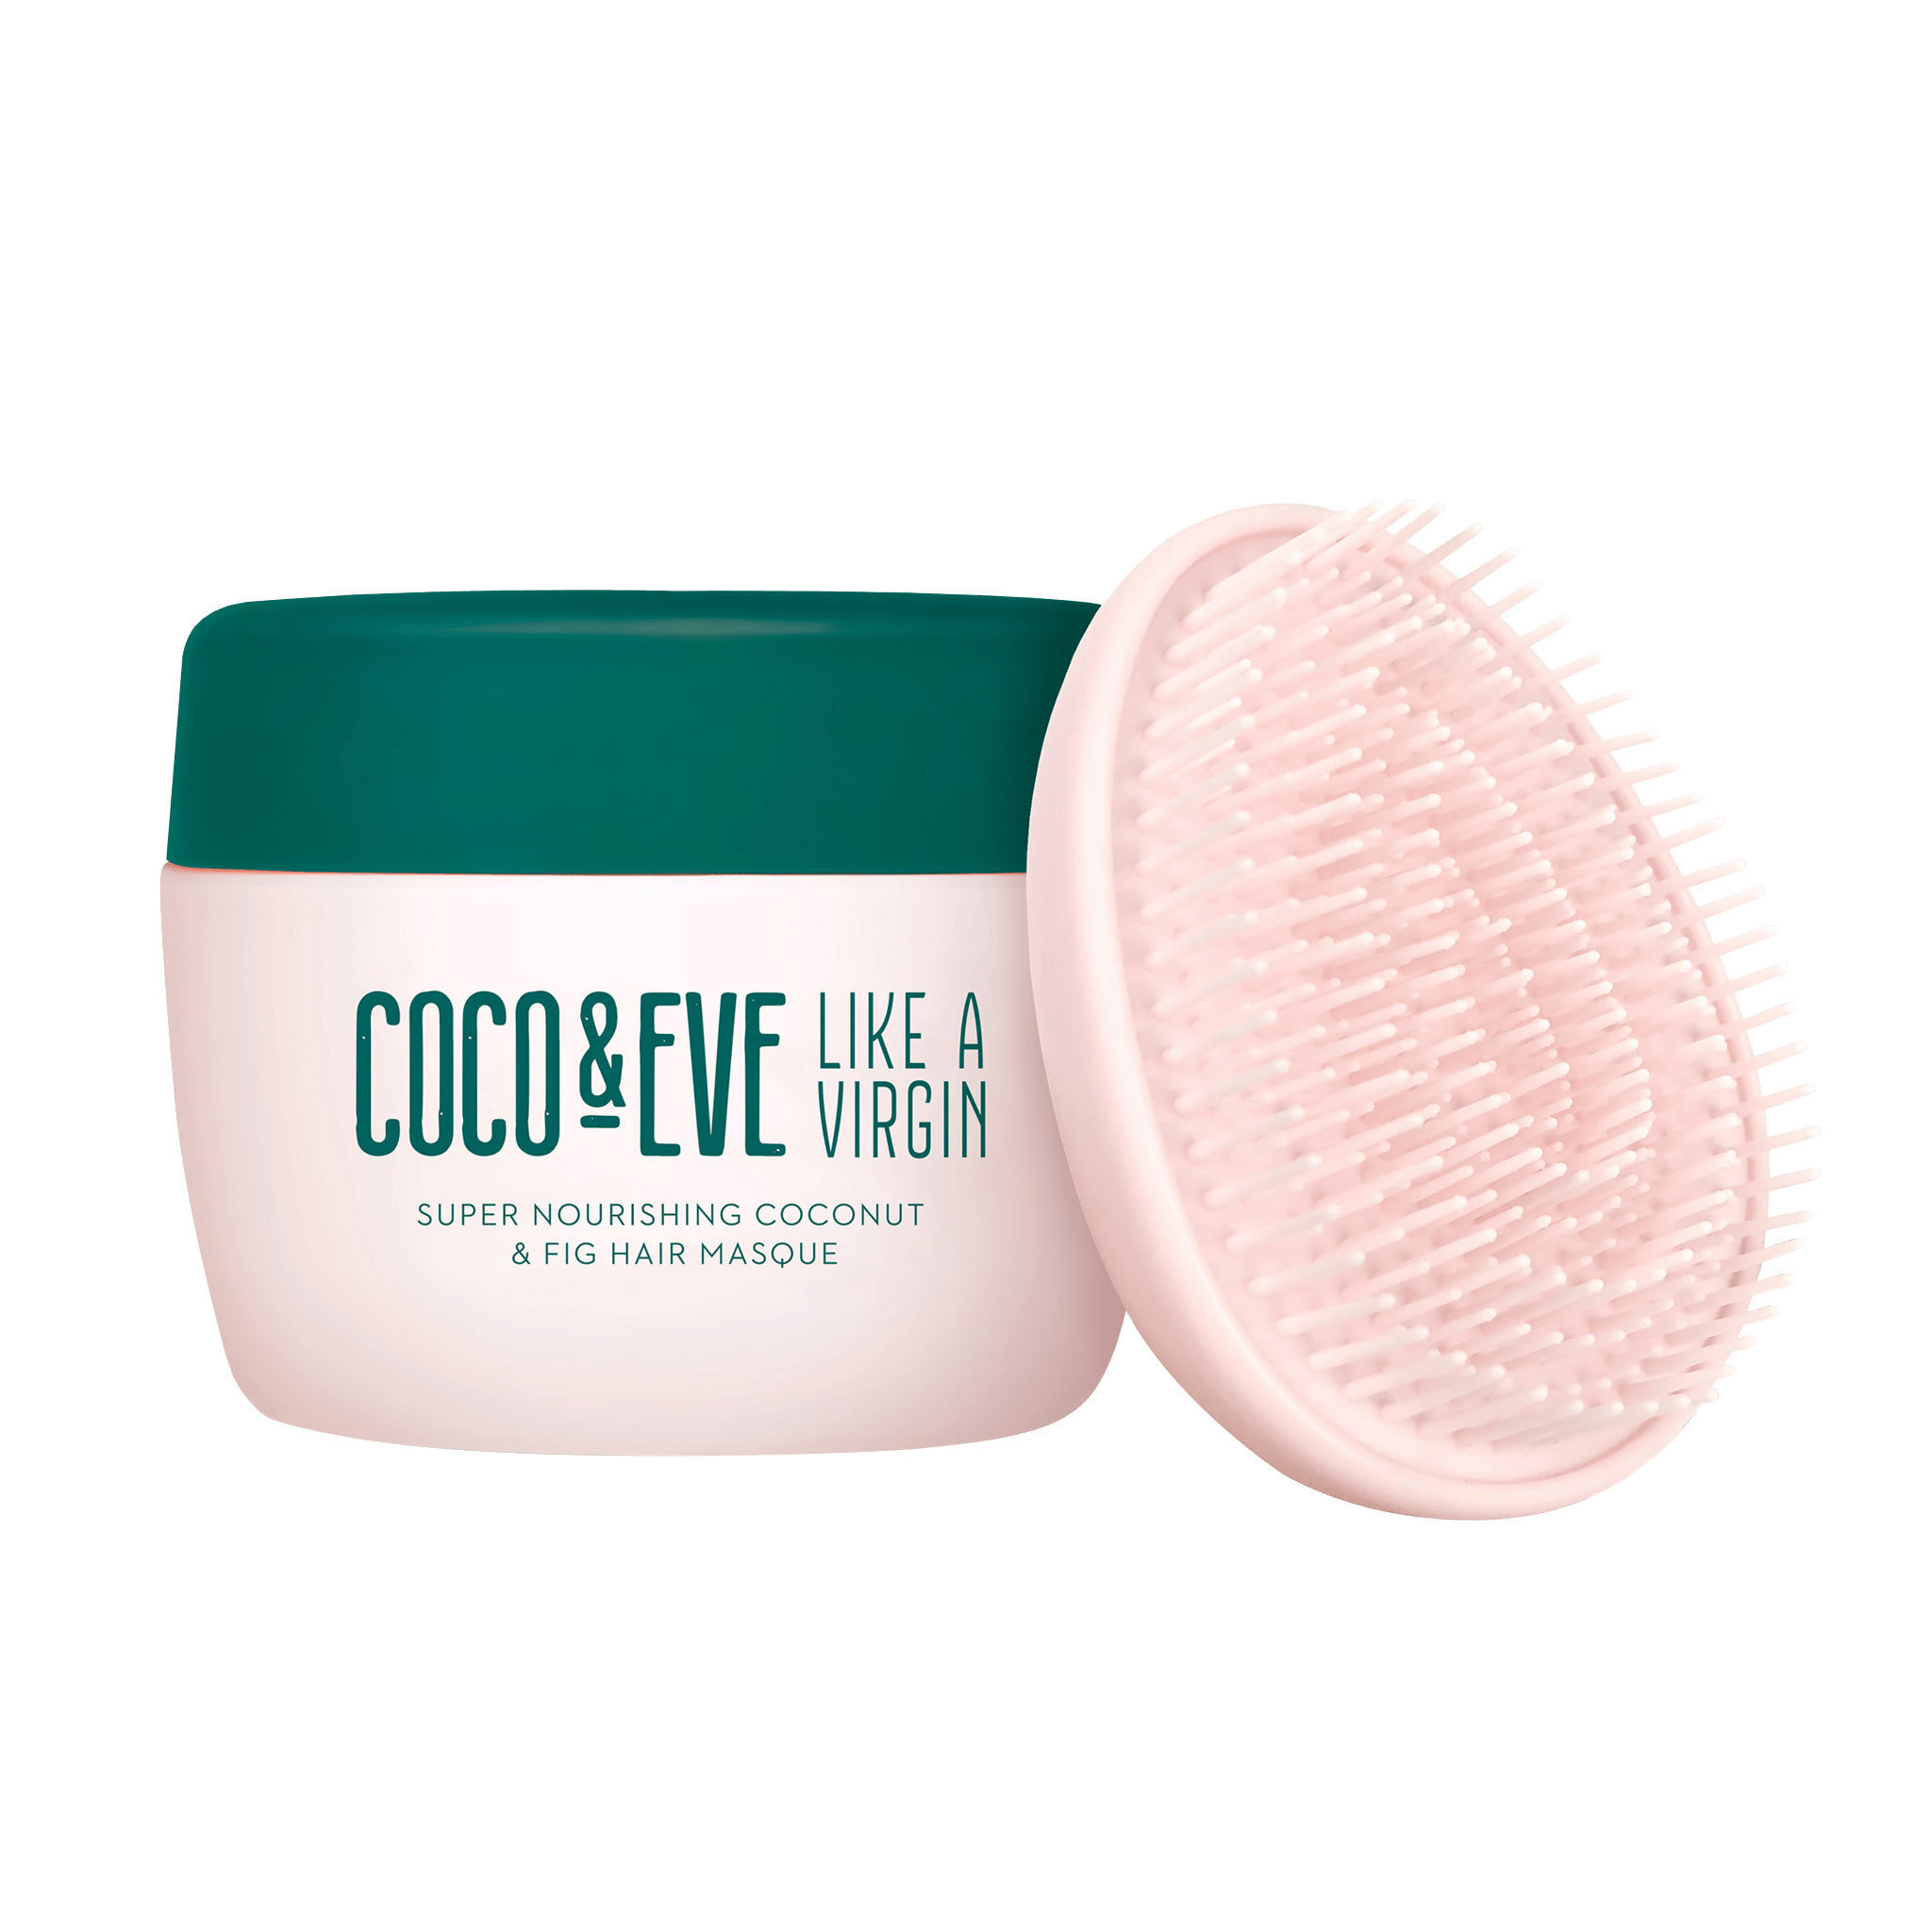 Coco & Eve Like A Virgin Super Nourishing Coconut & Fig Hair Masque 212ml with Tangle Tamer